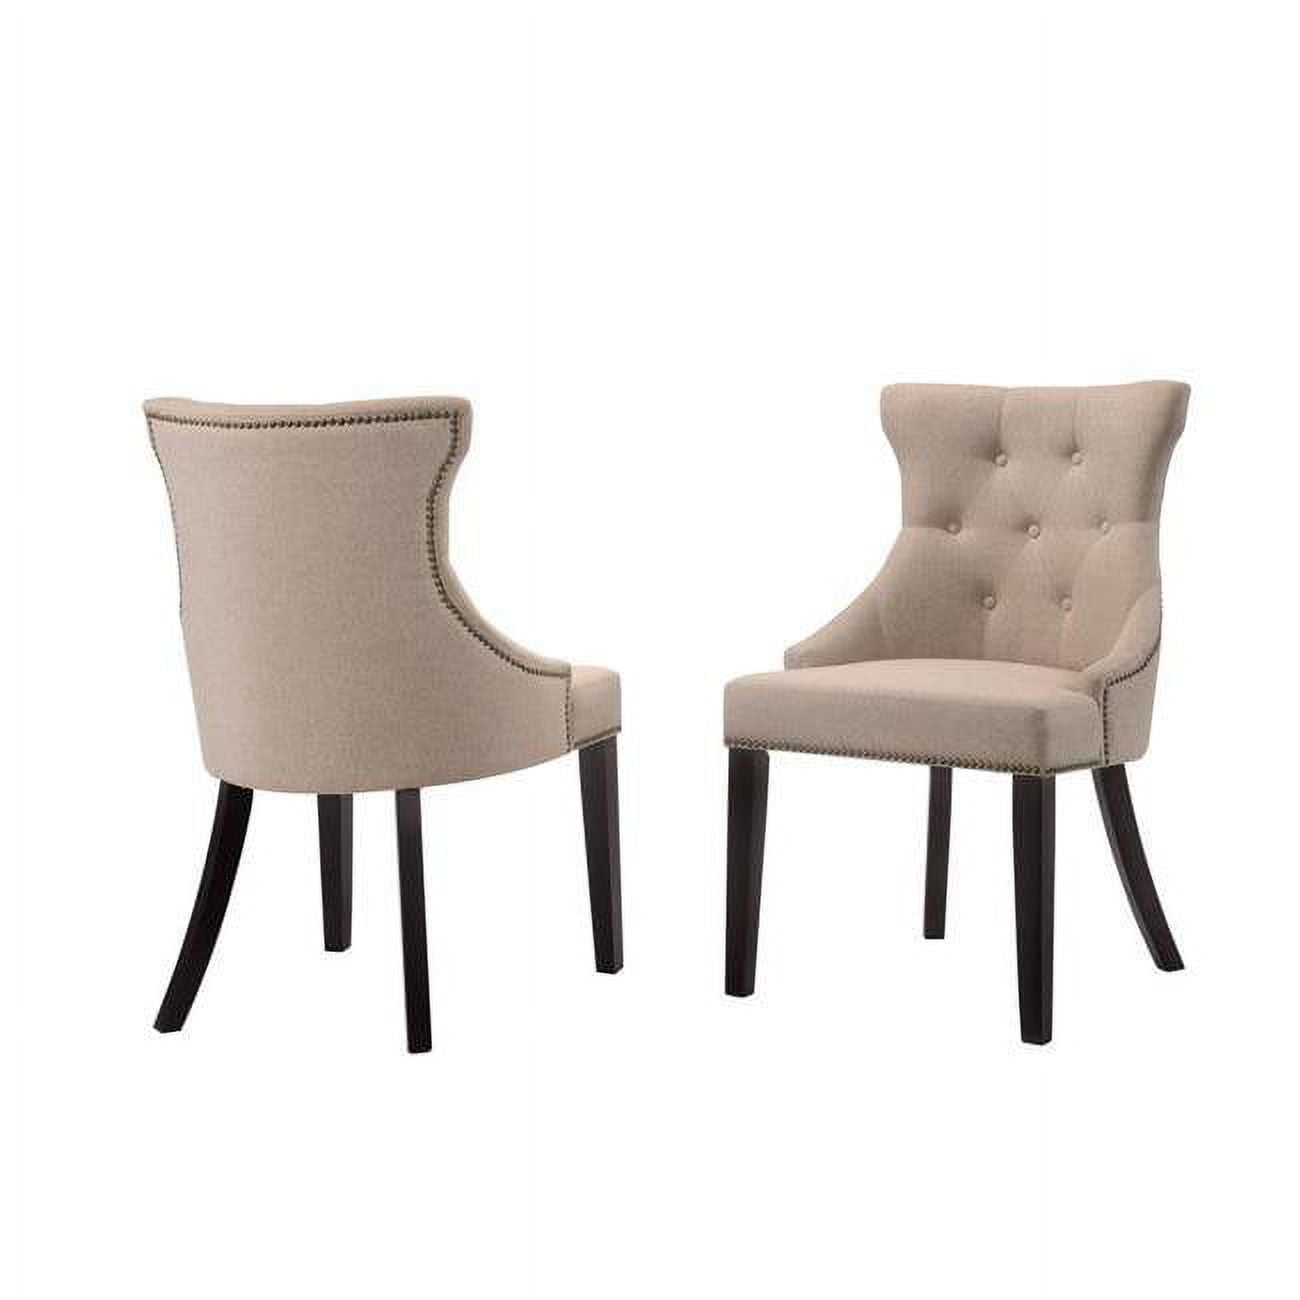 2123-espln Julia Tufted Back Upholstered Nail Head Chair - Espresso - Cream Linen - Set Of 2 - 23.5 X 21 X 35 In.